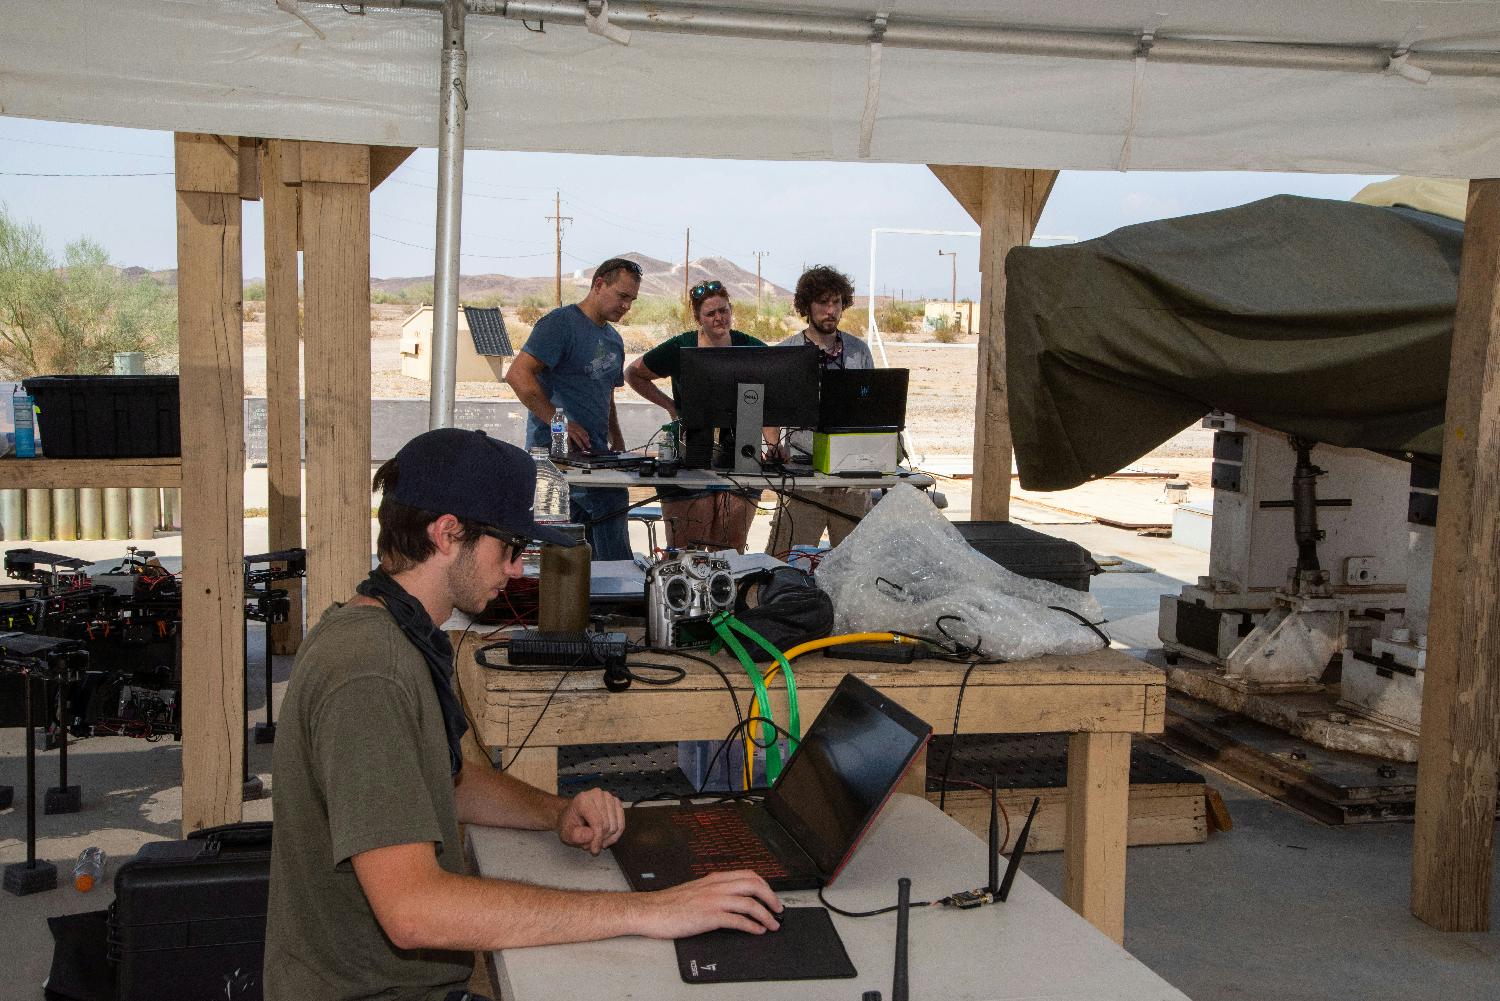 Our CEO working with the engineers during a drone field test in the Arizona desert.